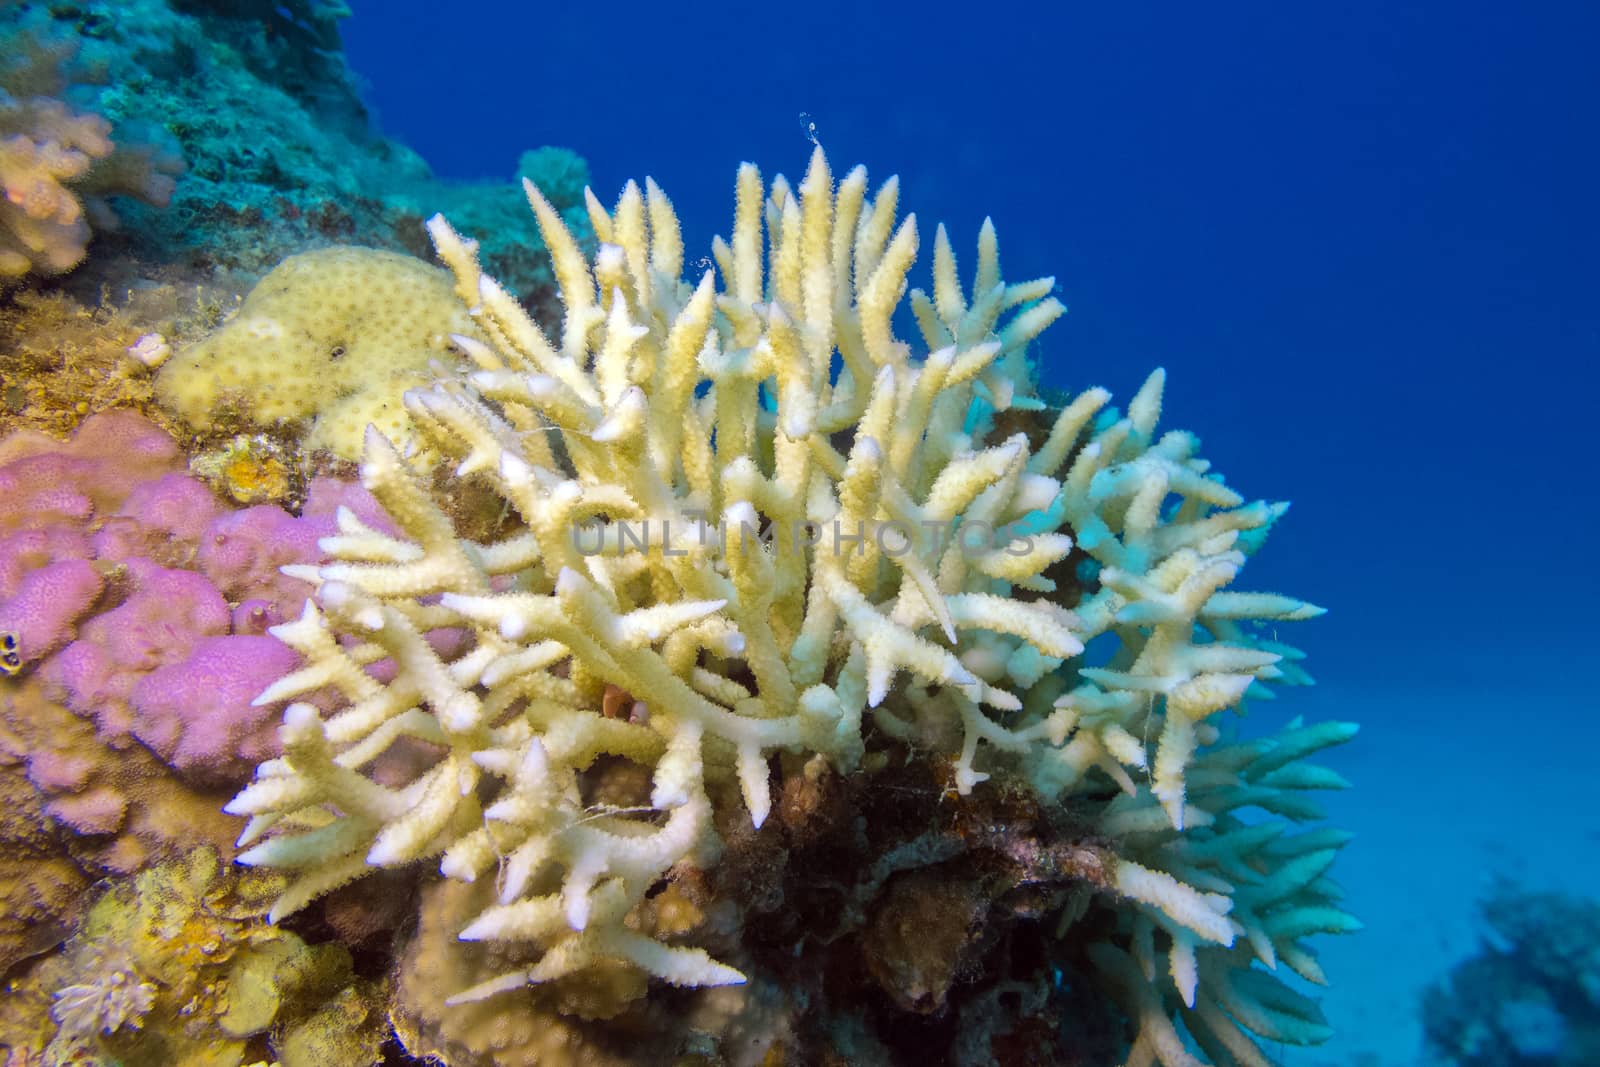 Birdsnest Coral at the bottom of tropical sea, underwater by mychadre77